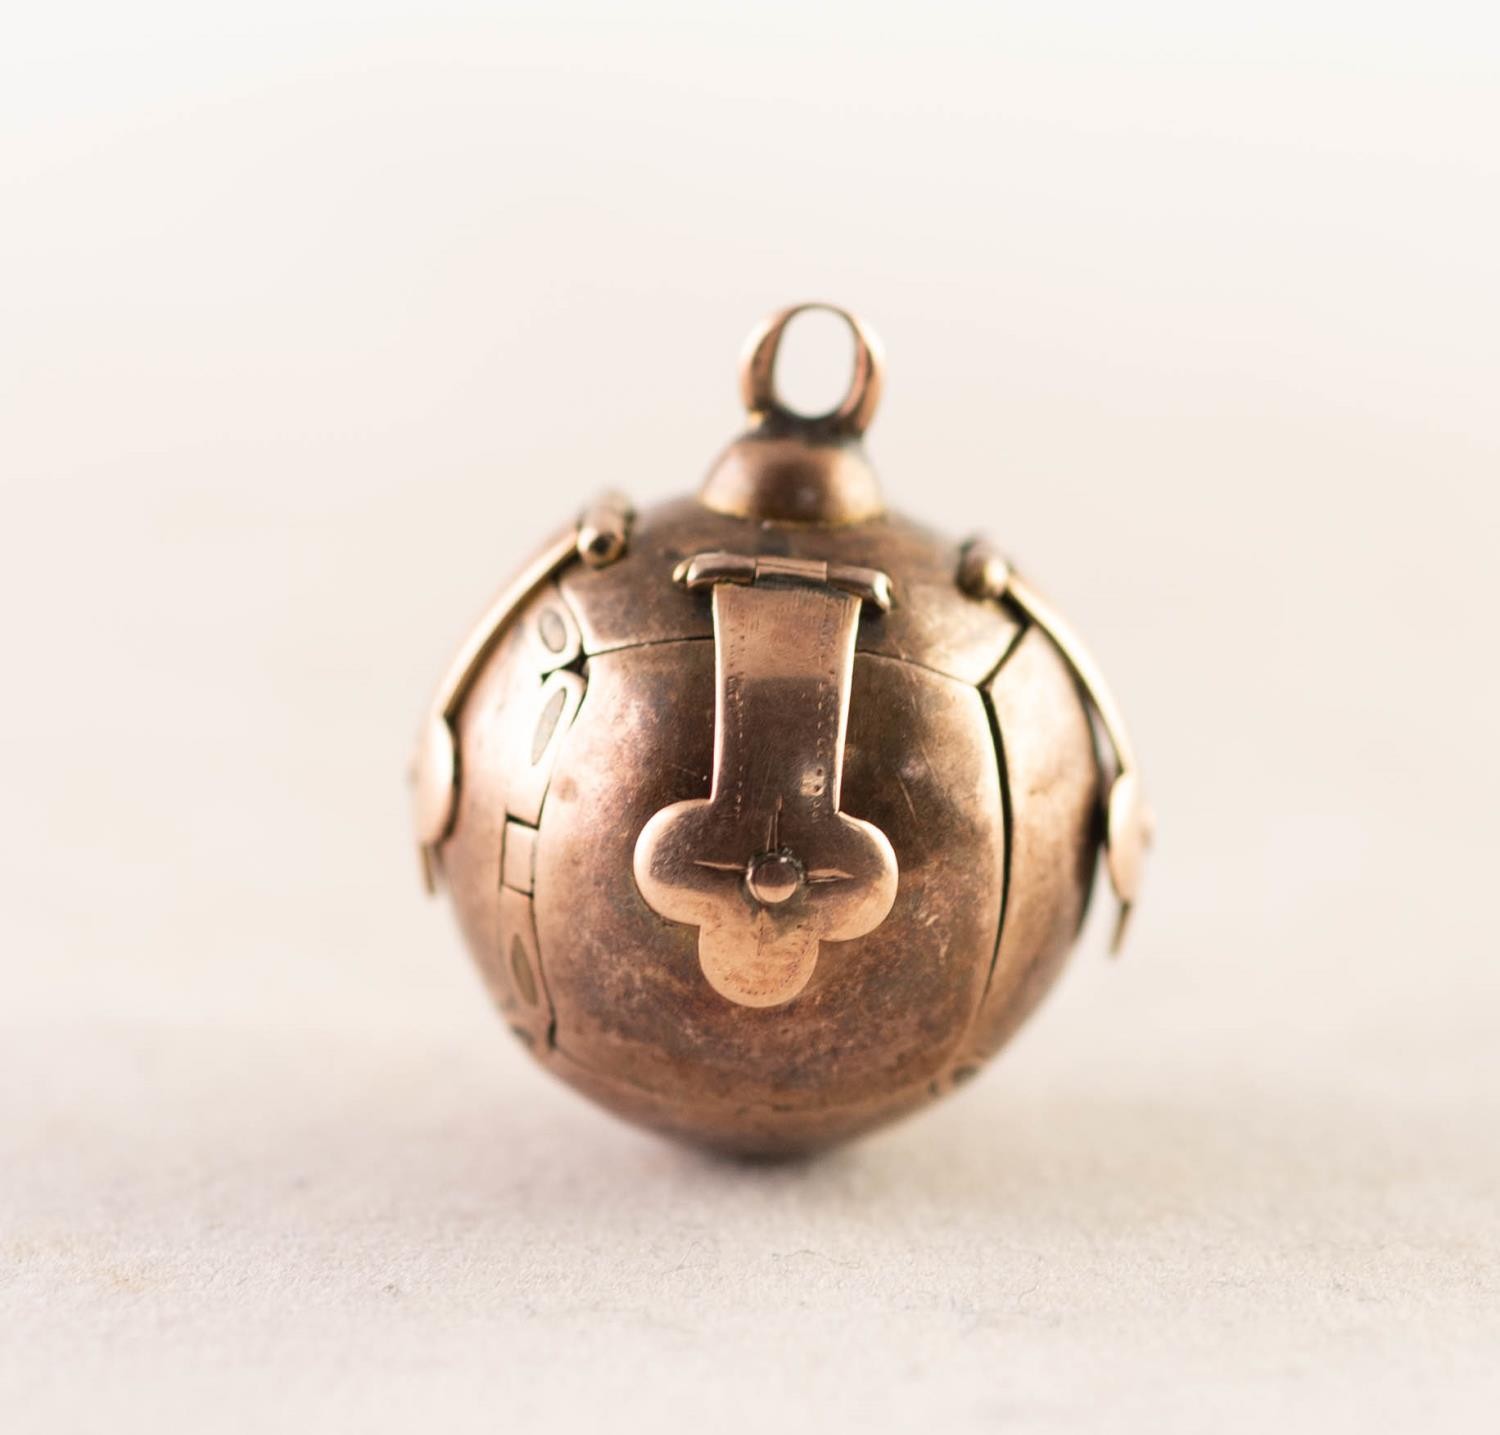 ROLLED GOLD MASONIC BALL PENDANT, opening to form a cross engraved with Masonic symbols